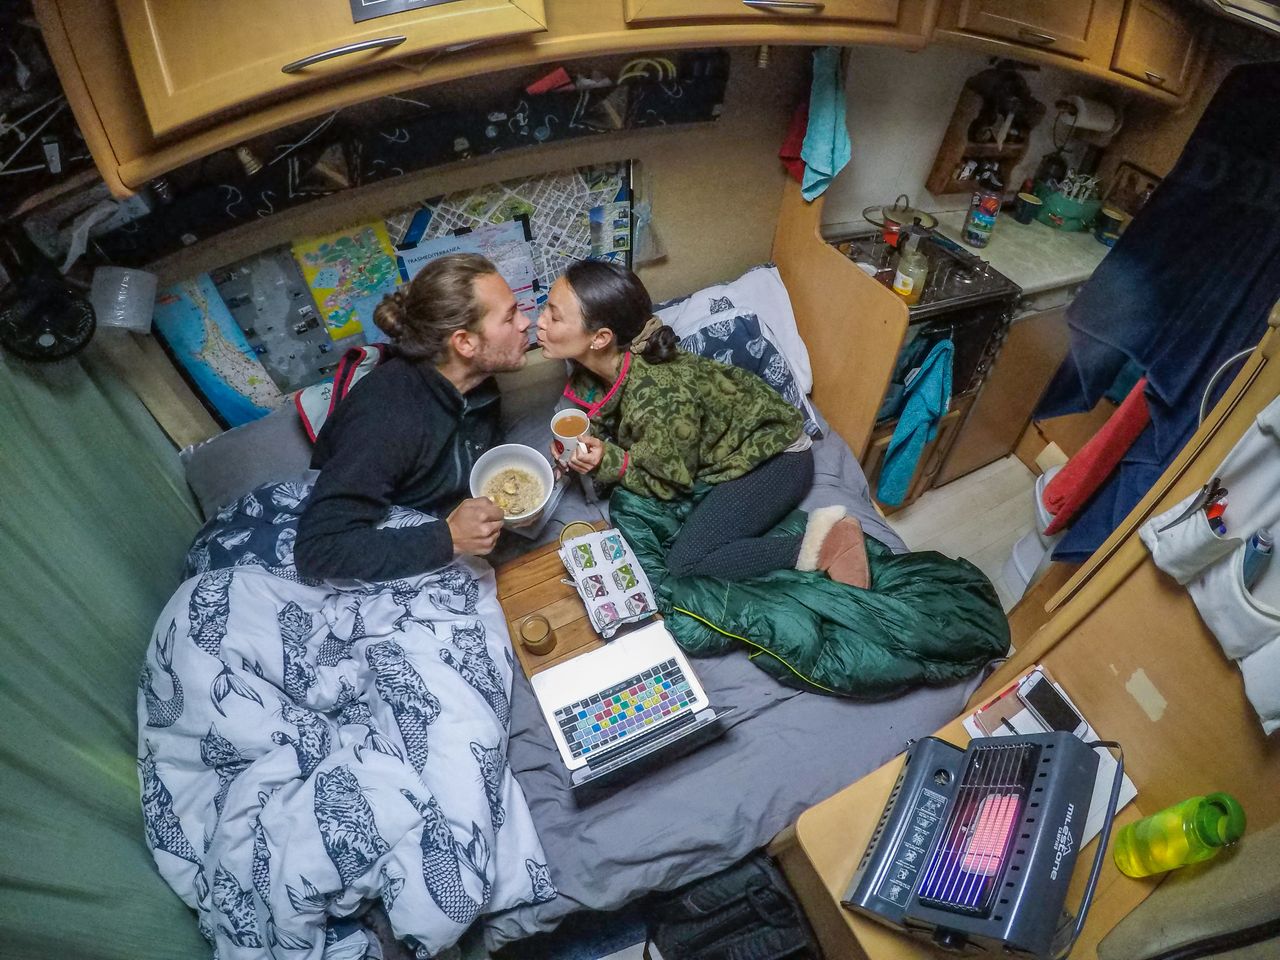 Drew and Brittany keeping each other warm and cozy in the middle of their first English winter, February 2016.